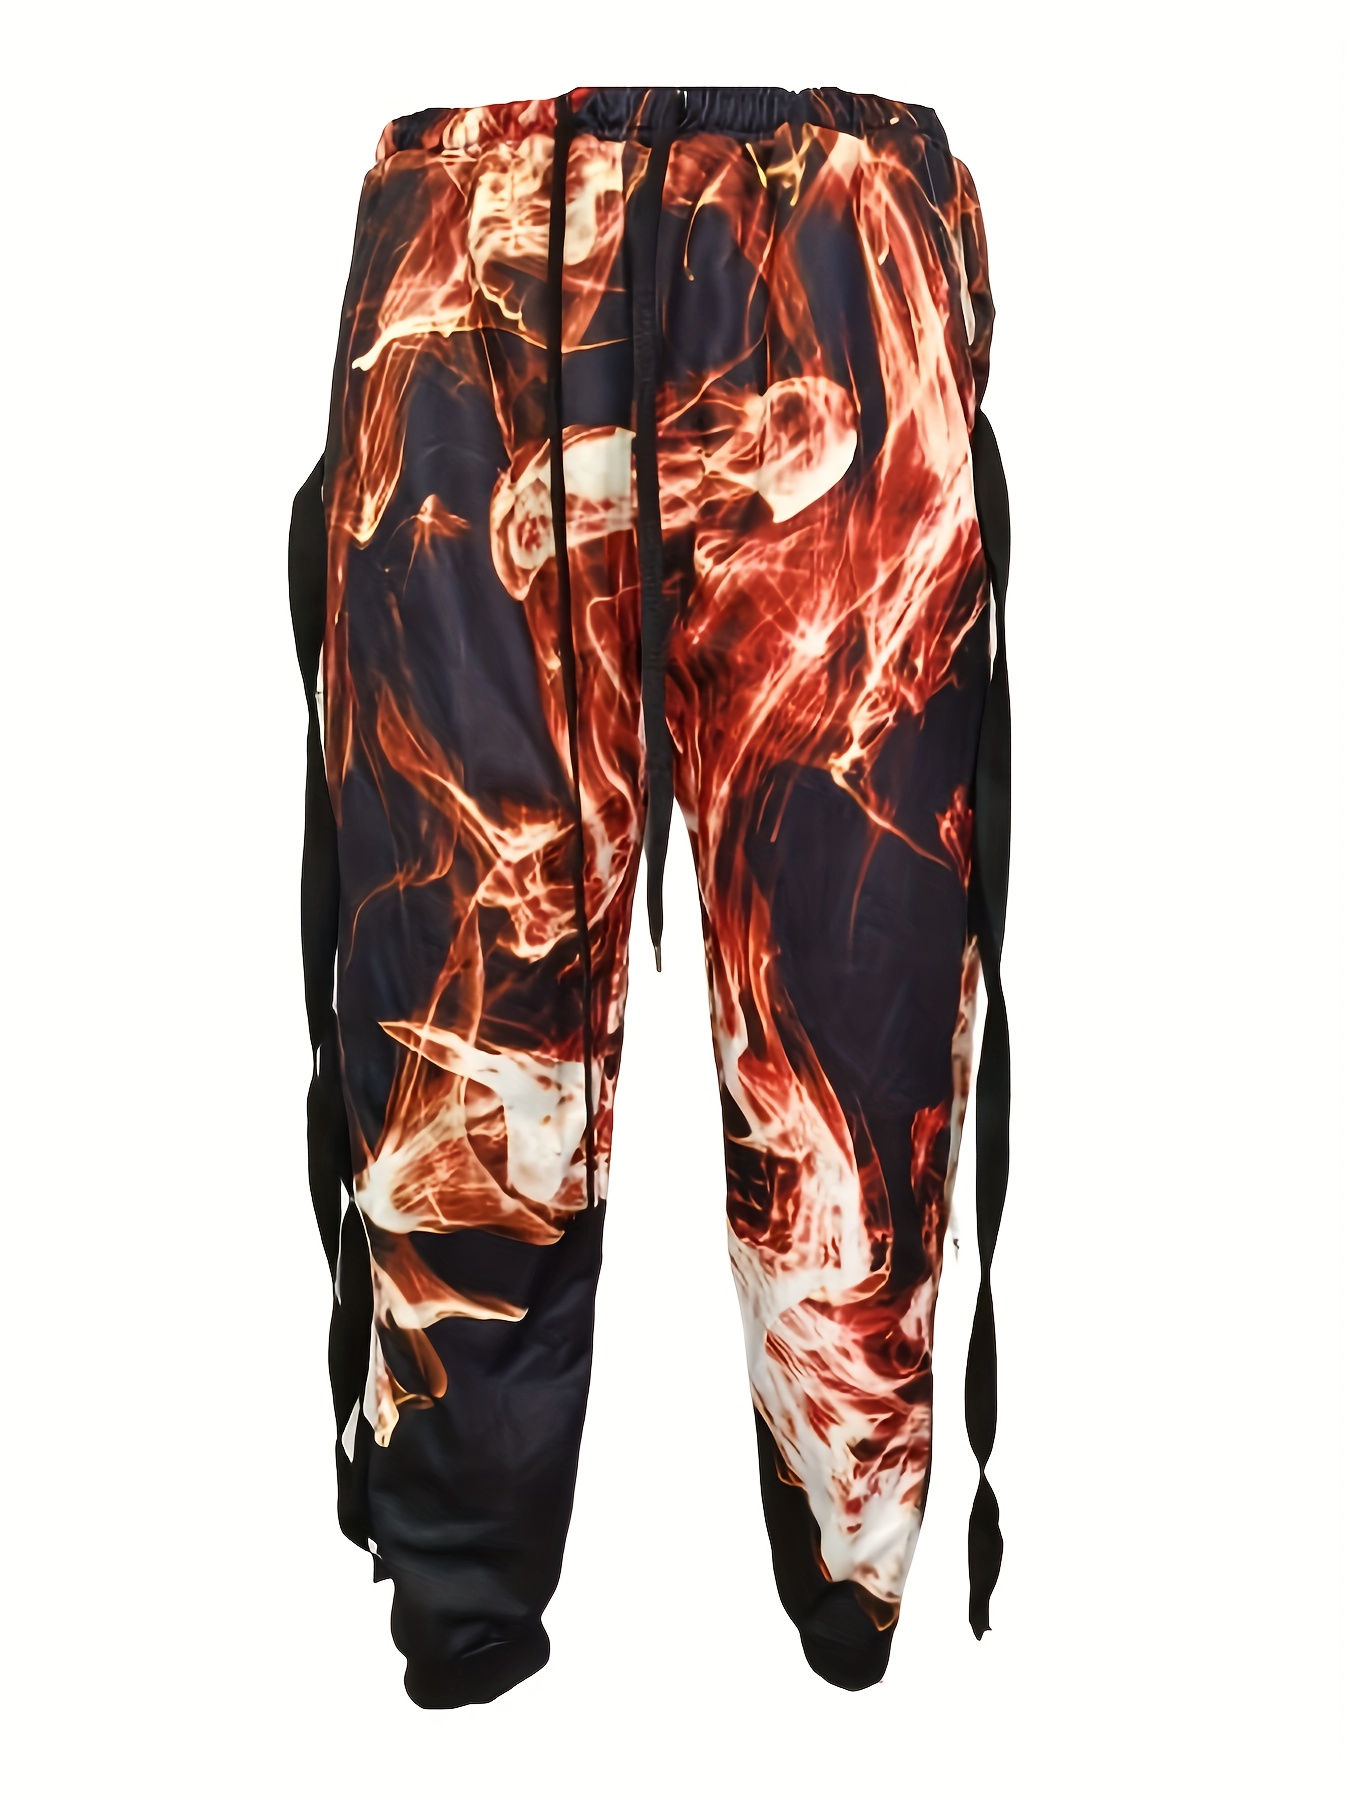 Flame Graphic Print Men's Street Style Loose Fit Sweatpants